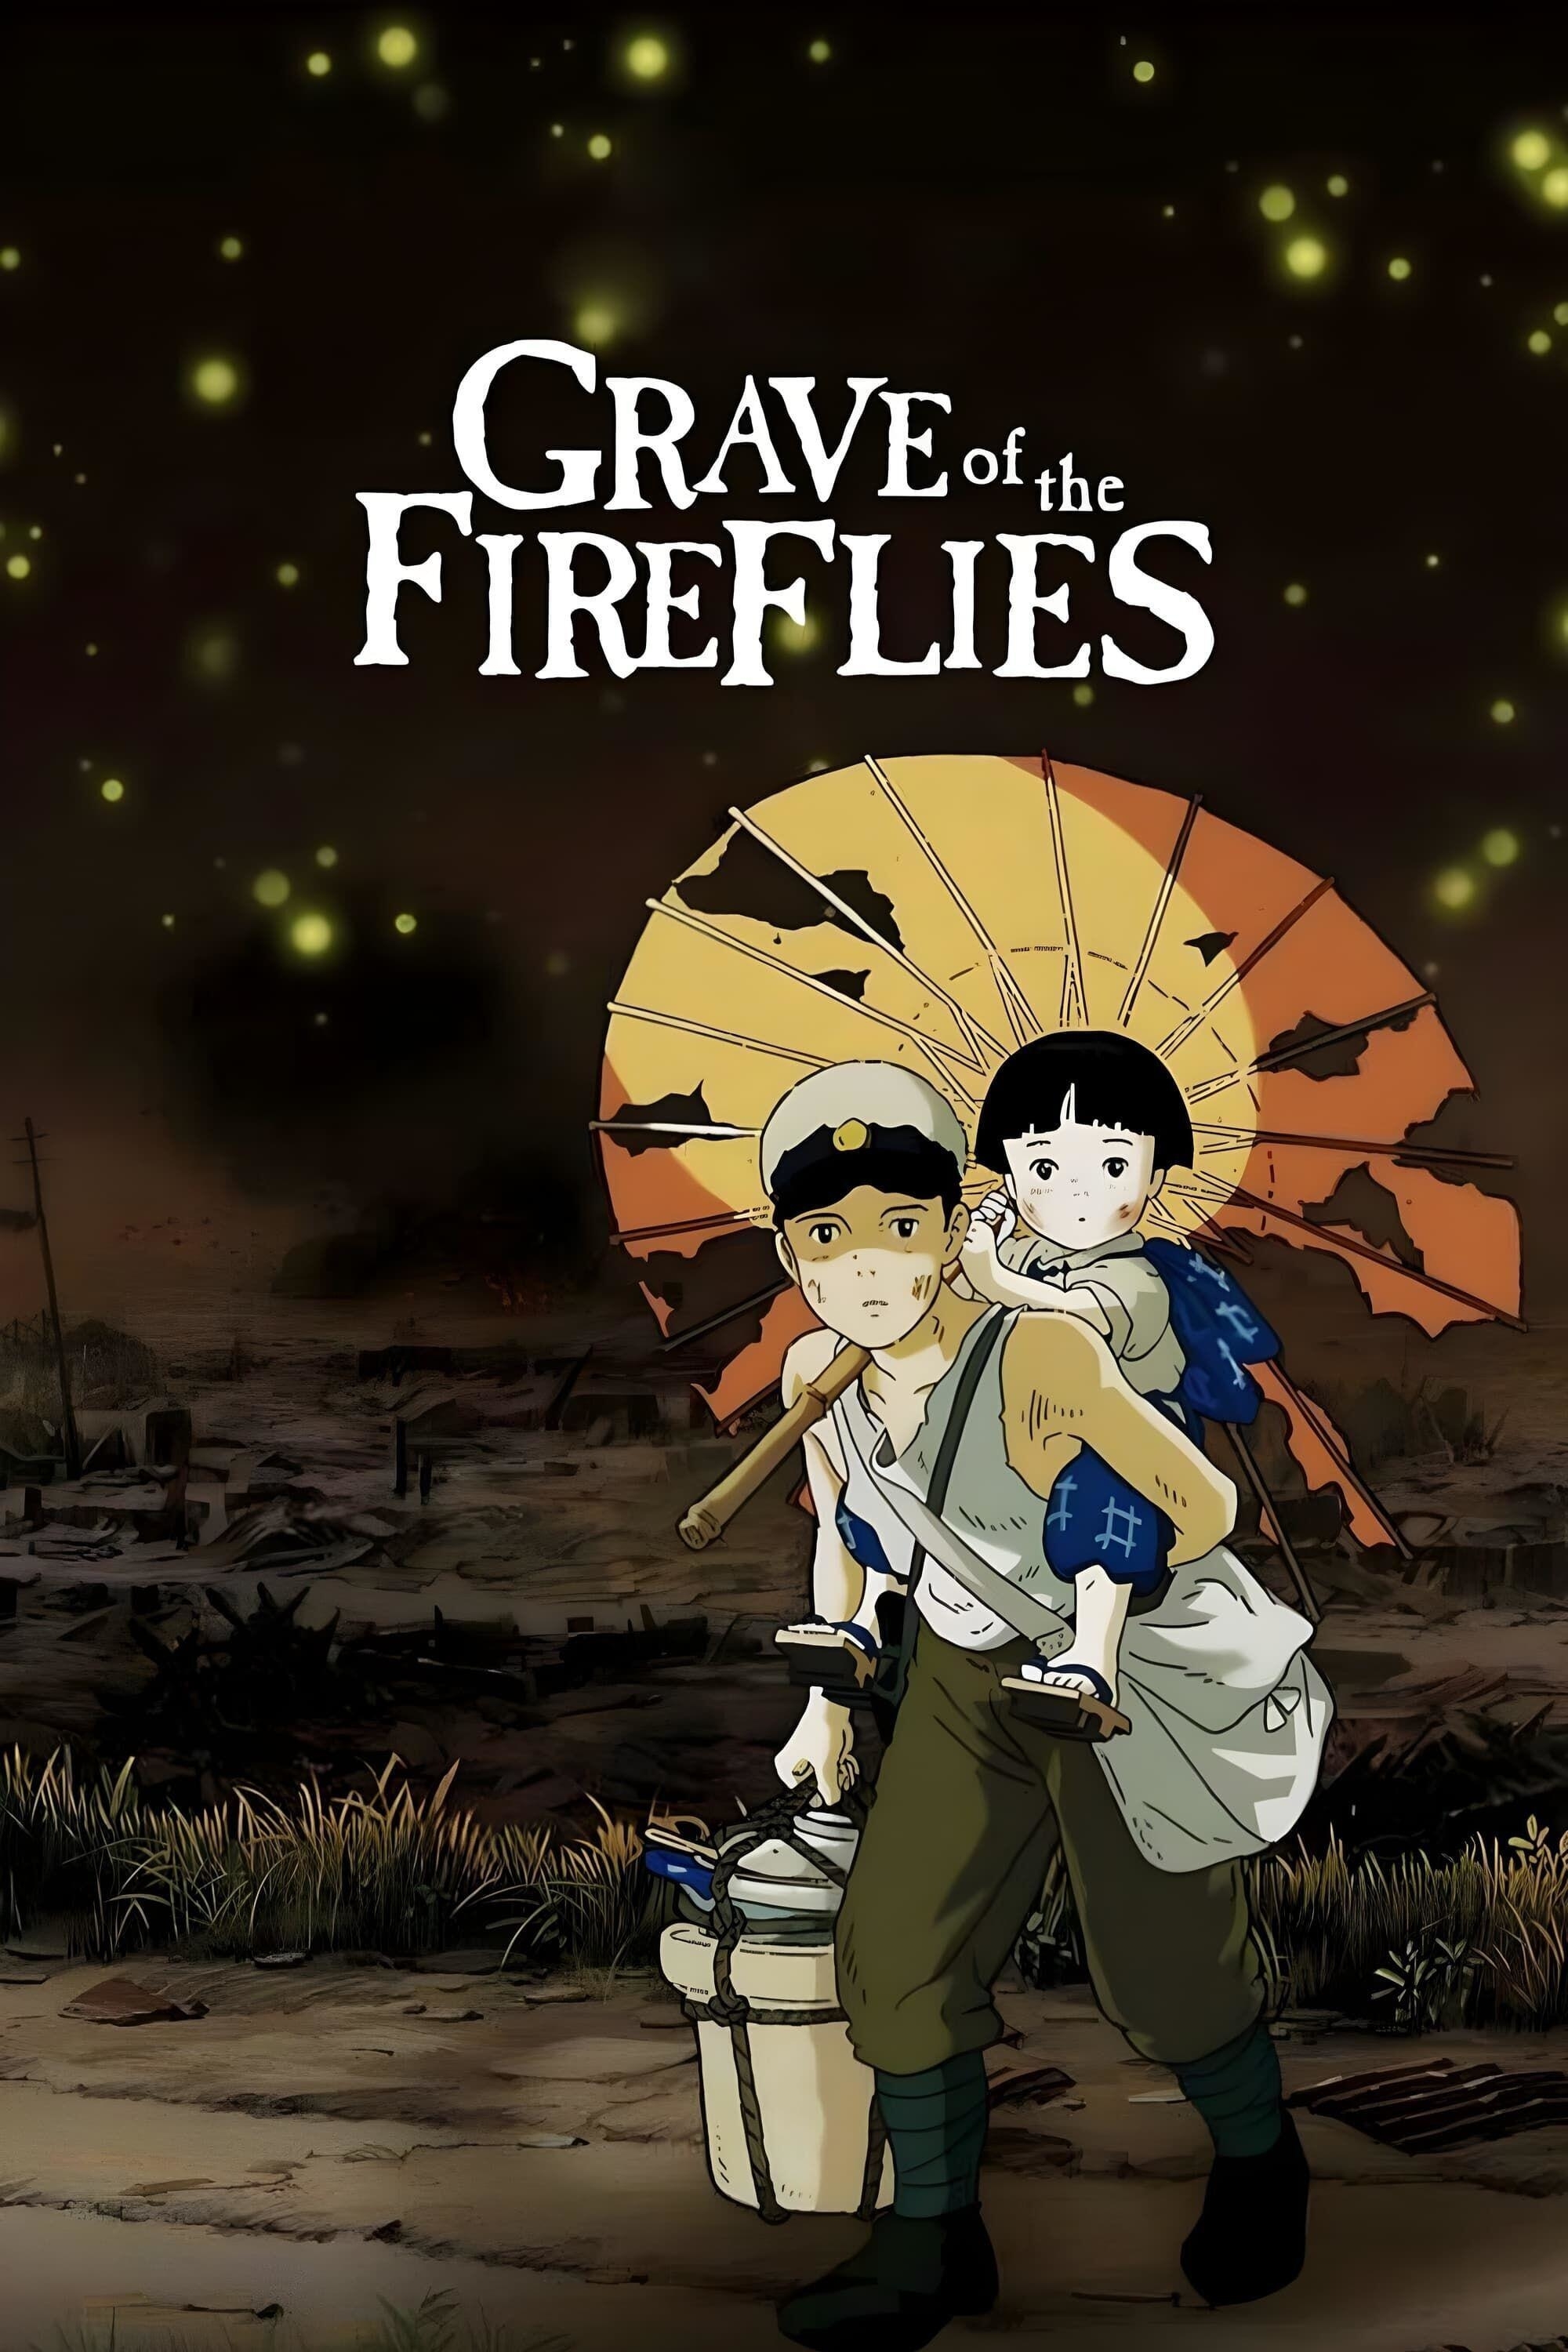 Poster Image for Grave of the Fireflies depicting the two main characters walking a battle scarred place while holding a tattered umbrella, as fireflies fall from the sky.